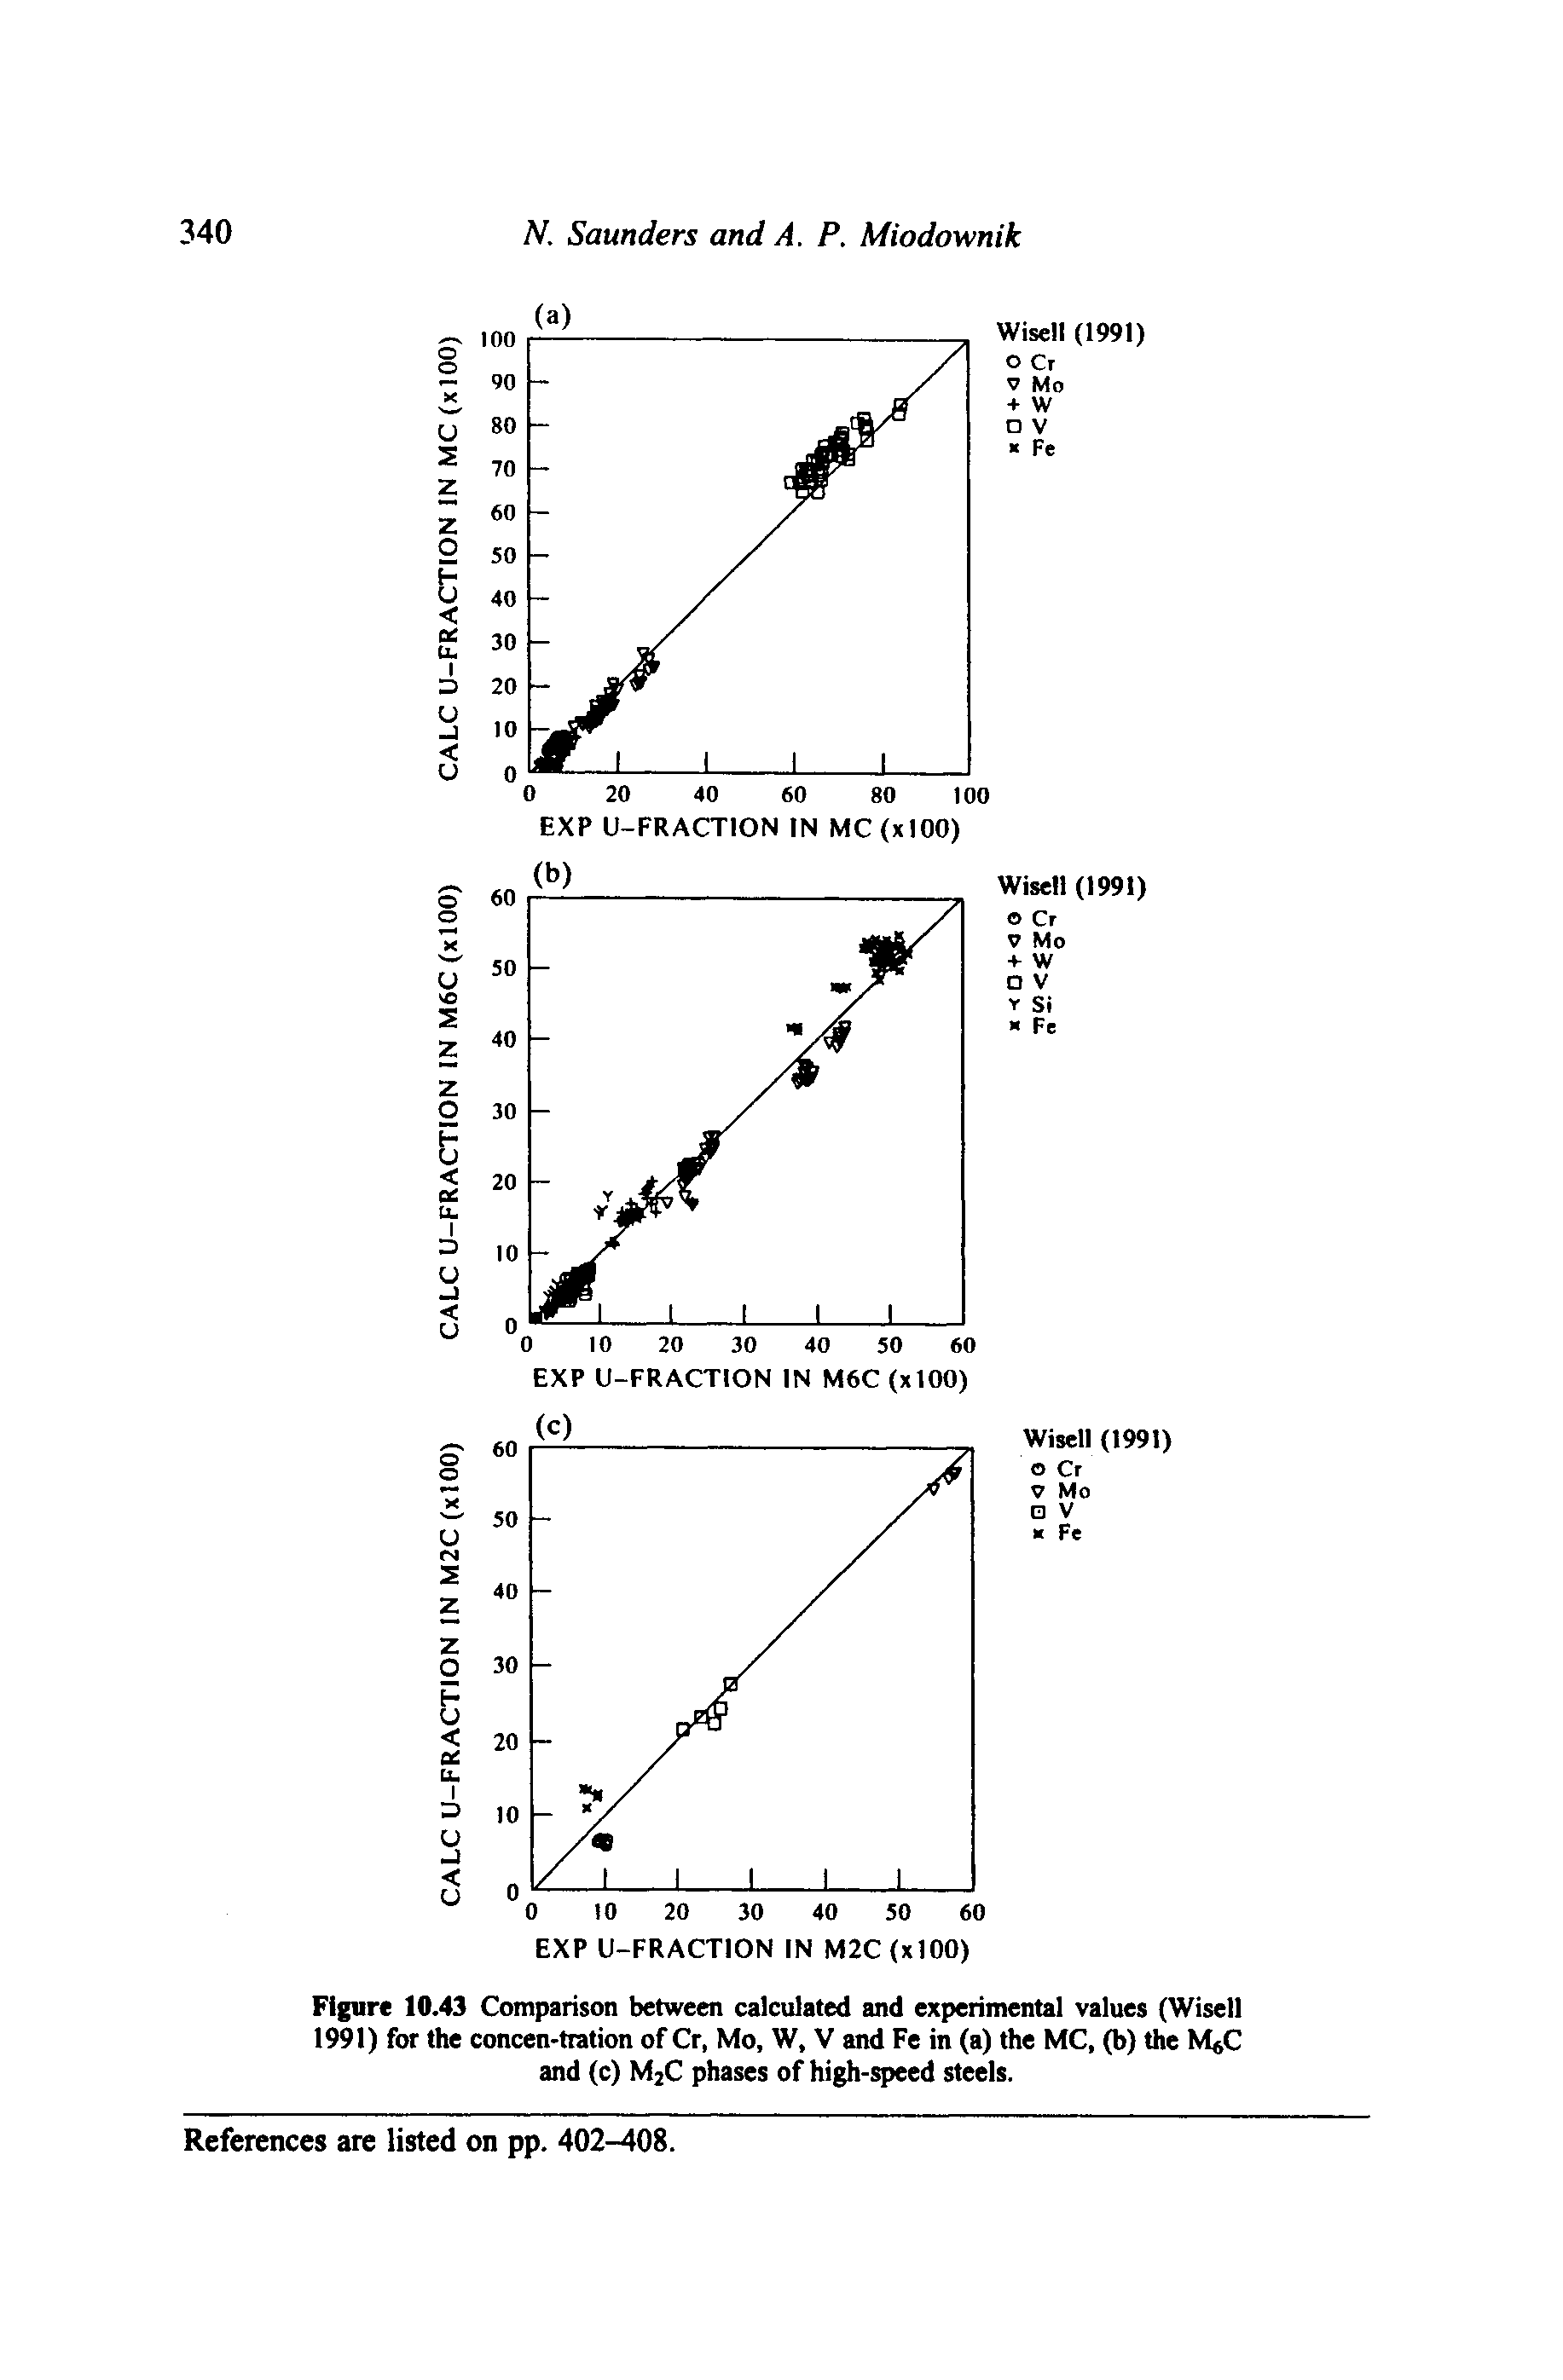 Figure 10.43 Comparison between calculated and experimental values (Wisell 1991) for the concen-tration of Cr, Mo, W, V and Fe in (a) the MC, (b) the M C and (c) MjC phases of high-speed steels.